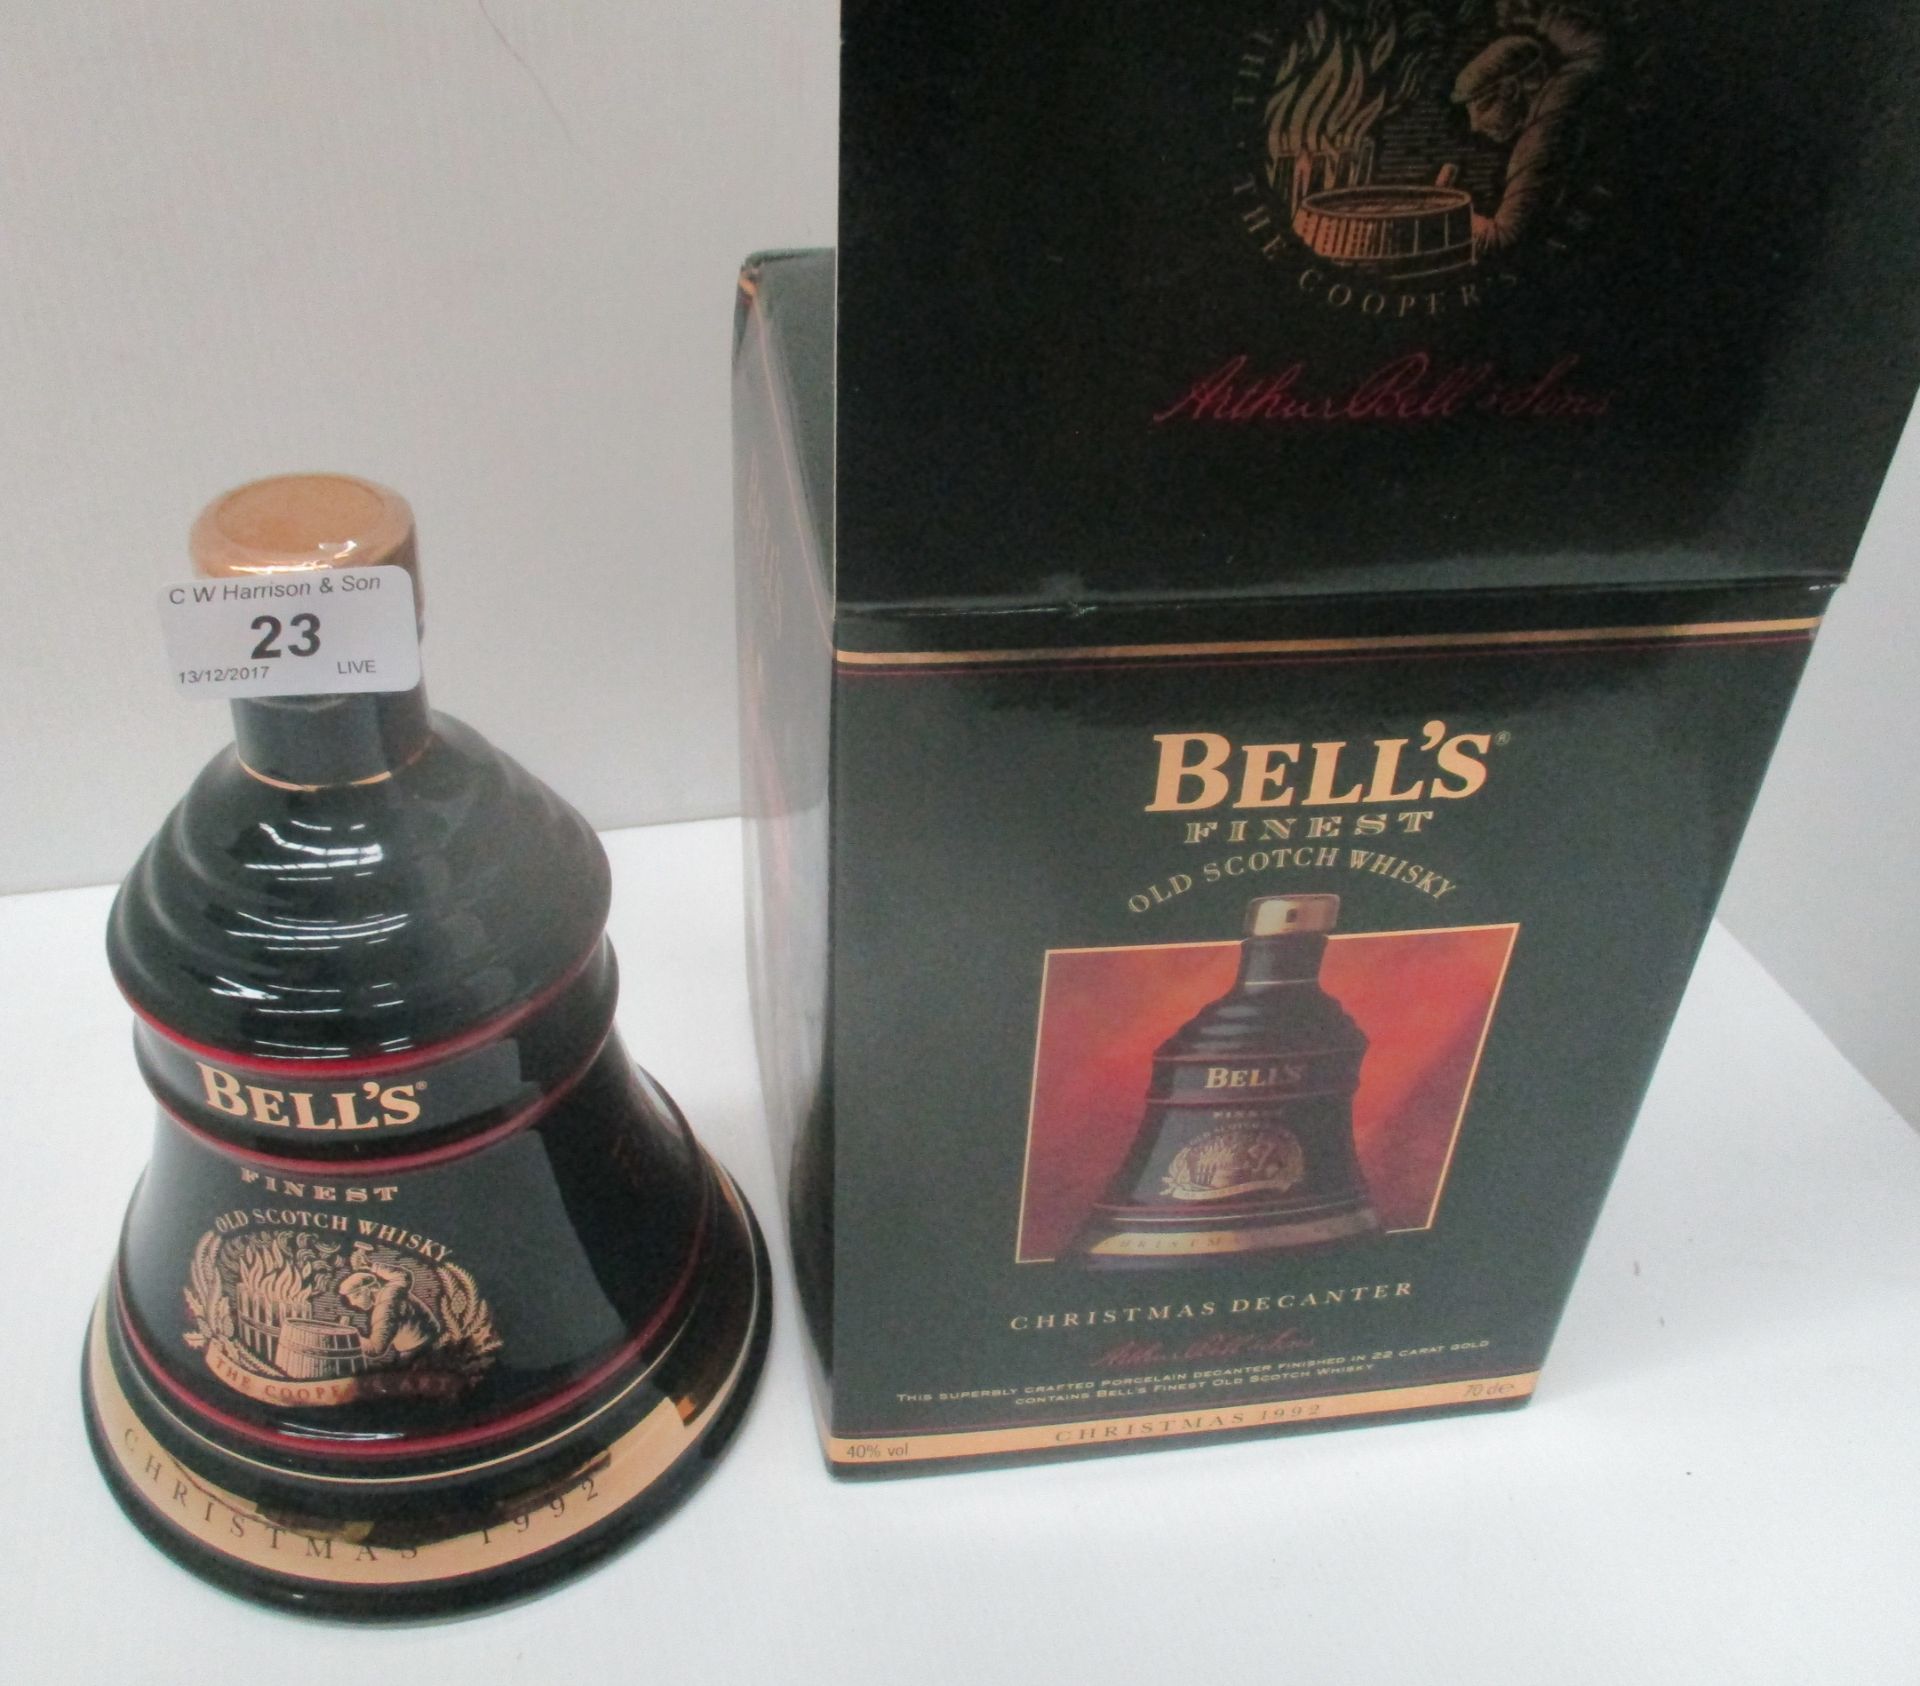 A 70cl Wade porcelain decanter containing Bell's Extra Special Old Scotch Whisky for Christmas 1992